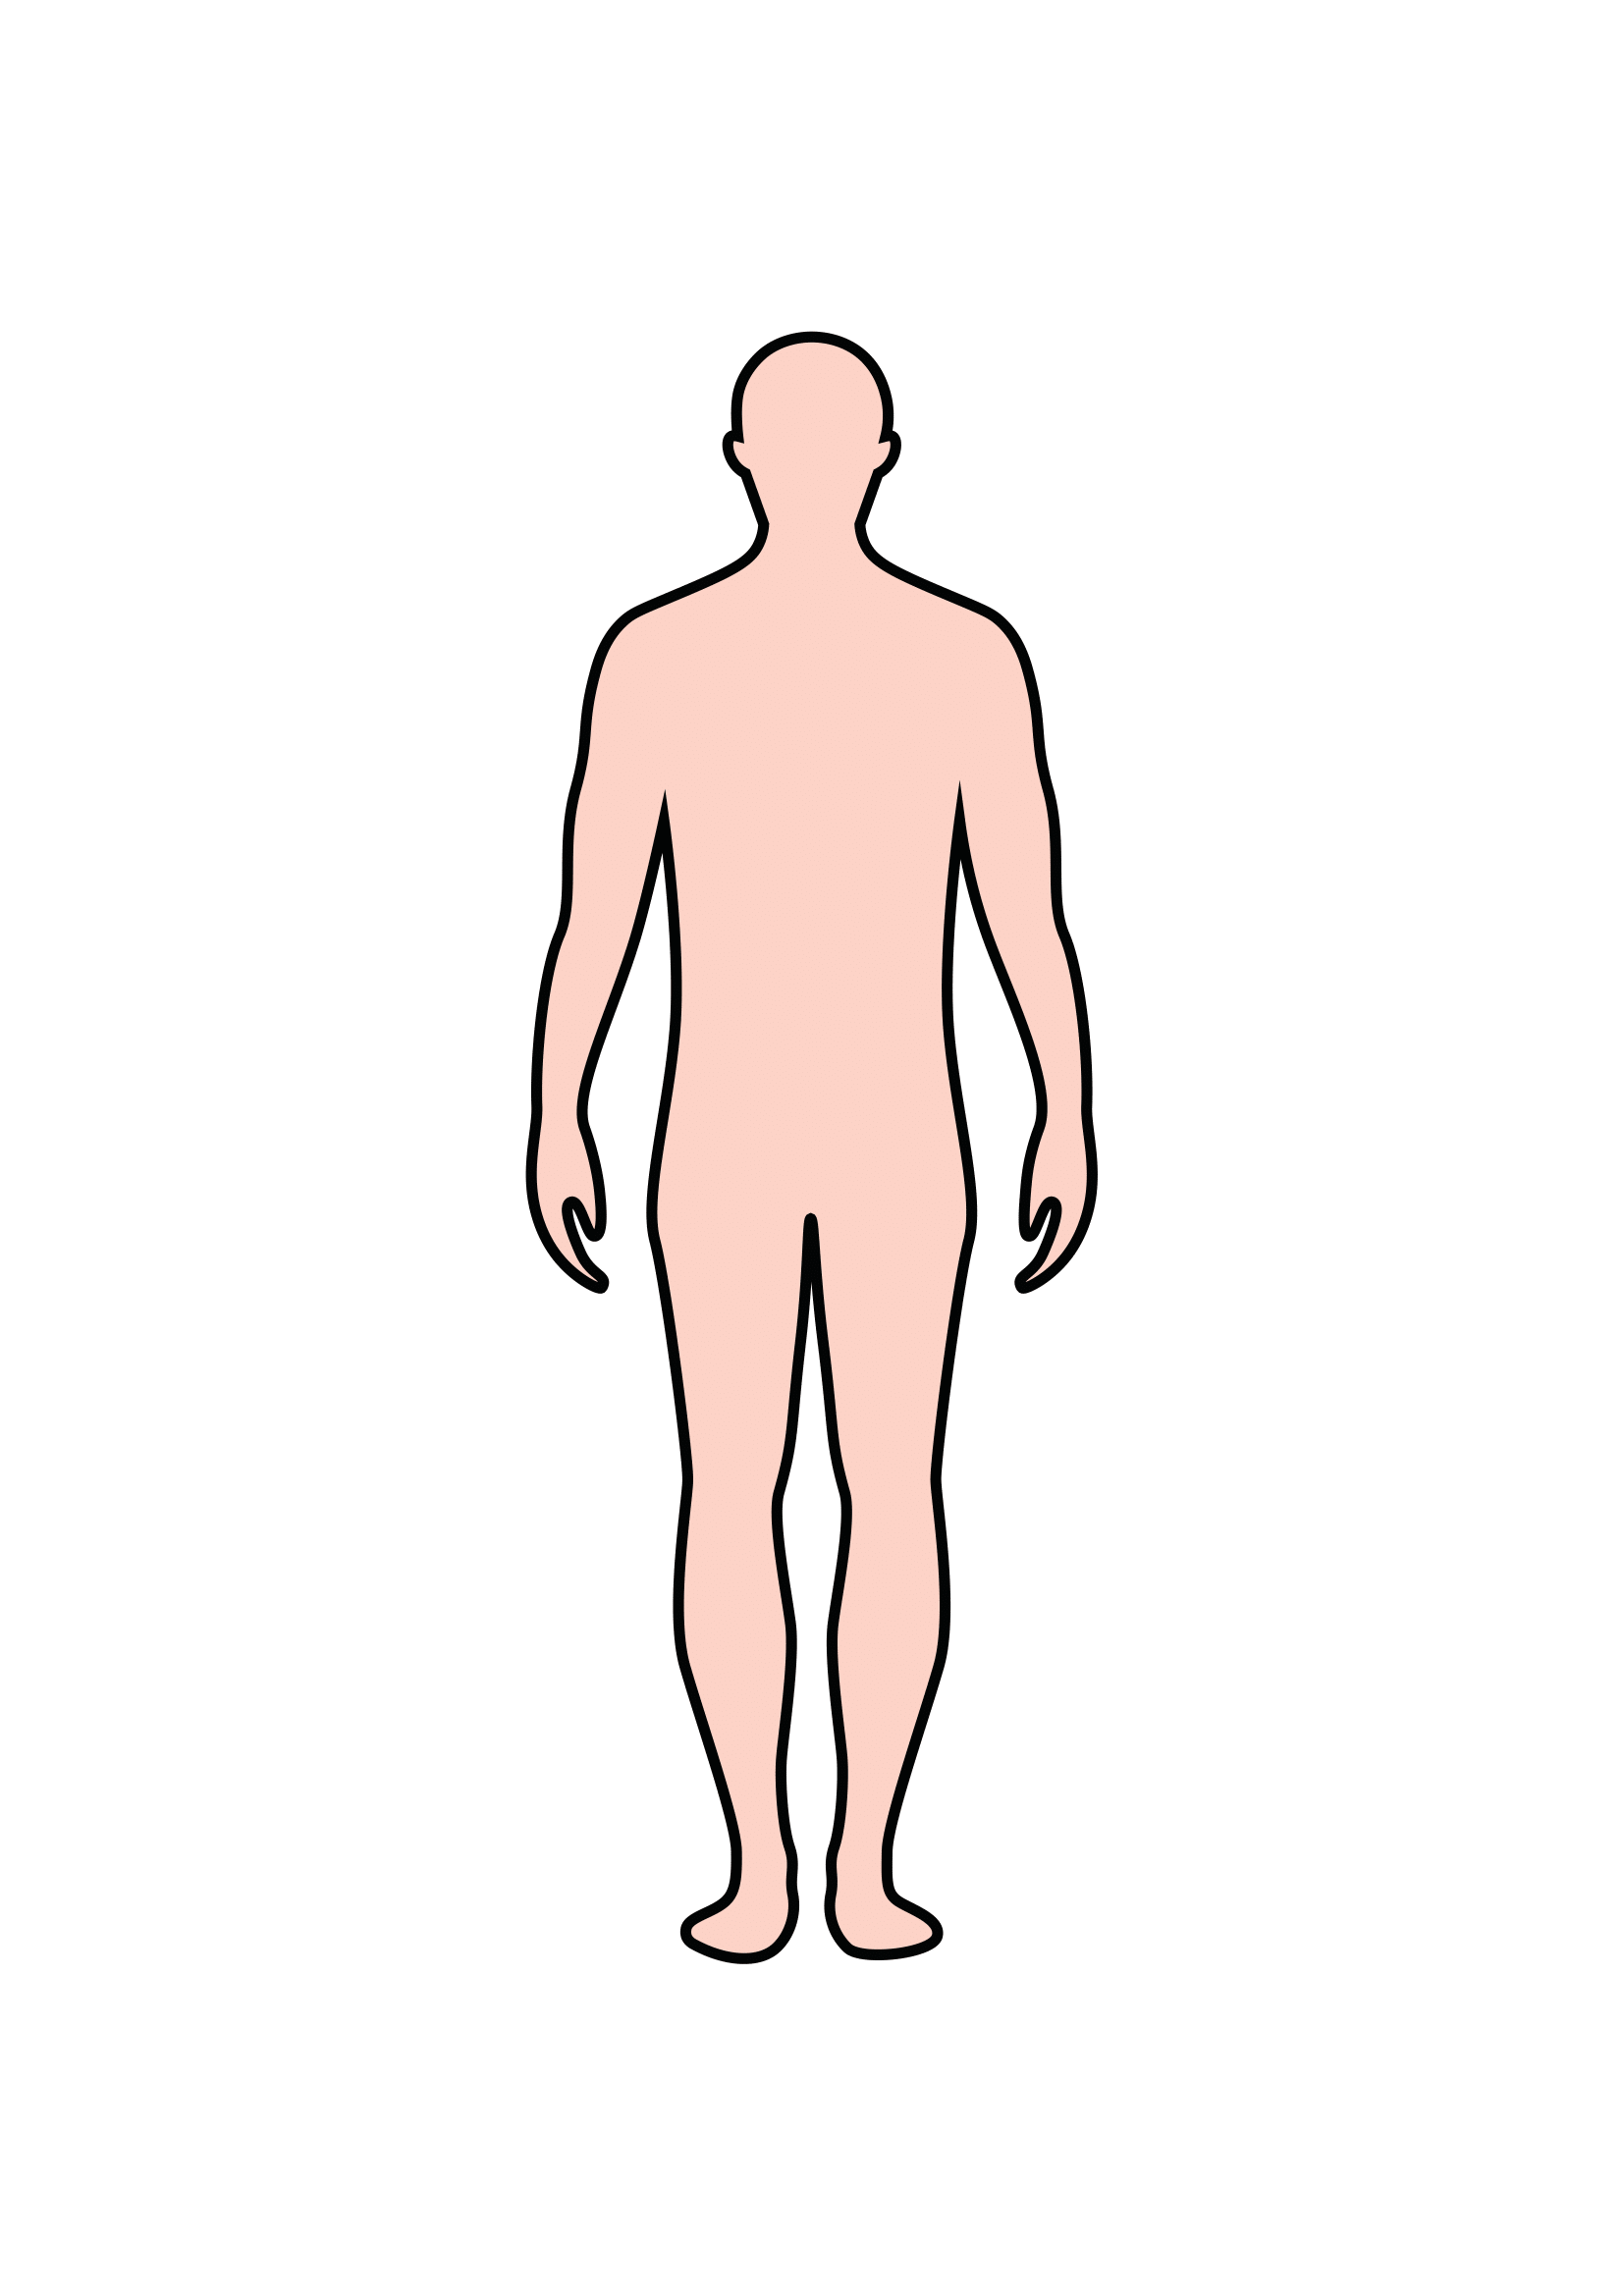 How to Draw A Body Outline Step by Step Printable